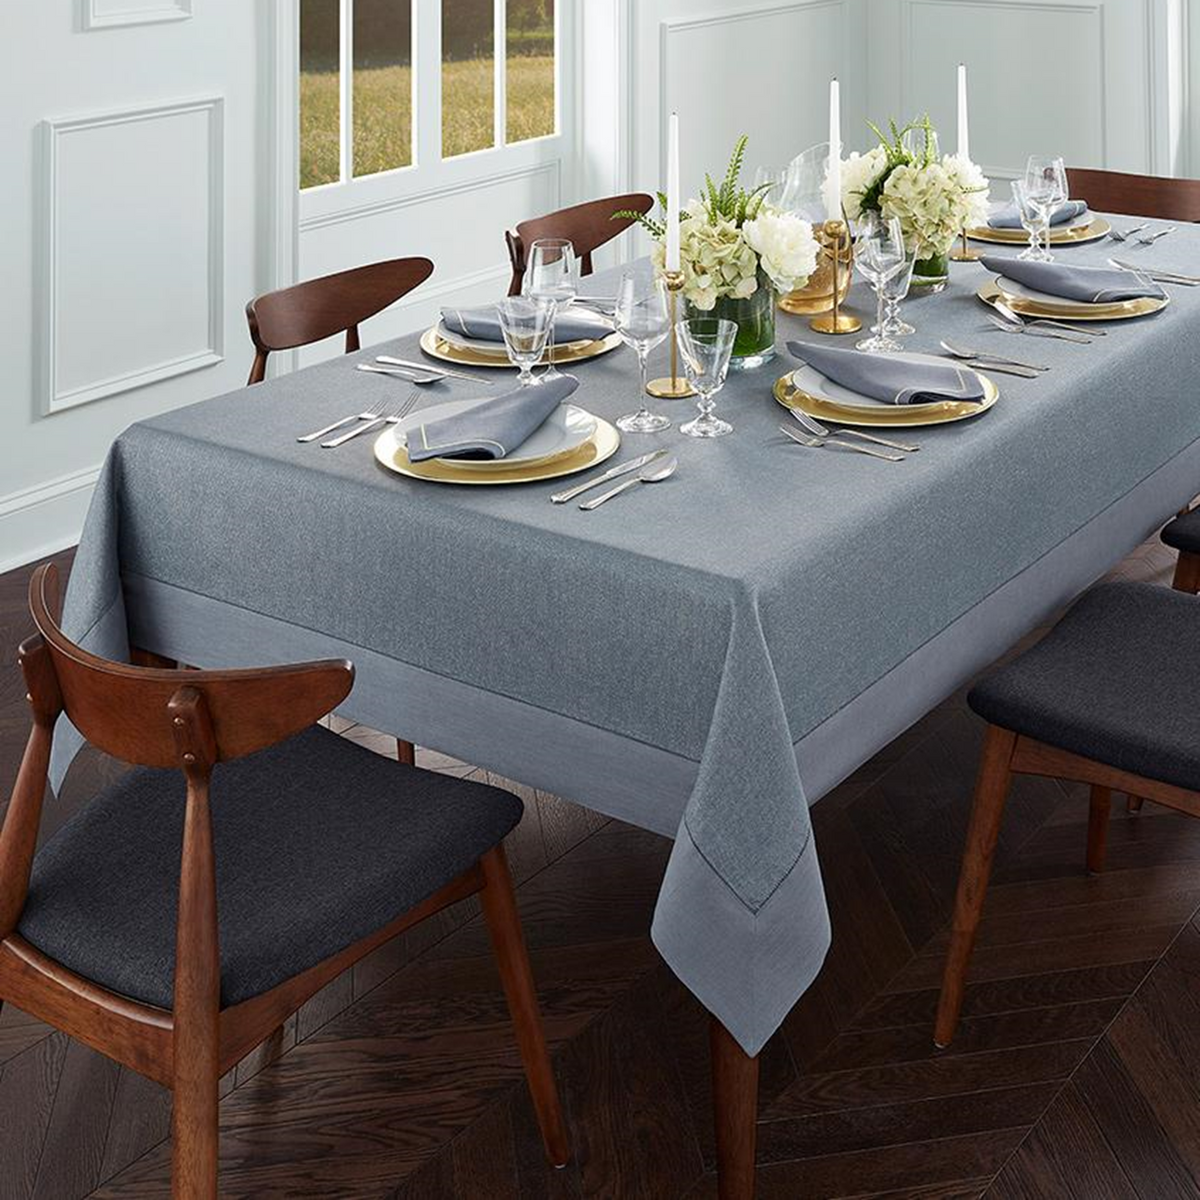 Lifestyle Image of Sferra Reece Table Linens in Flint/Gold Color